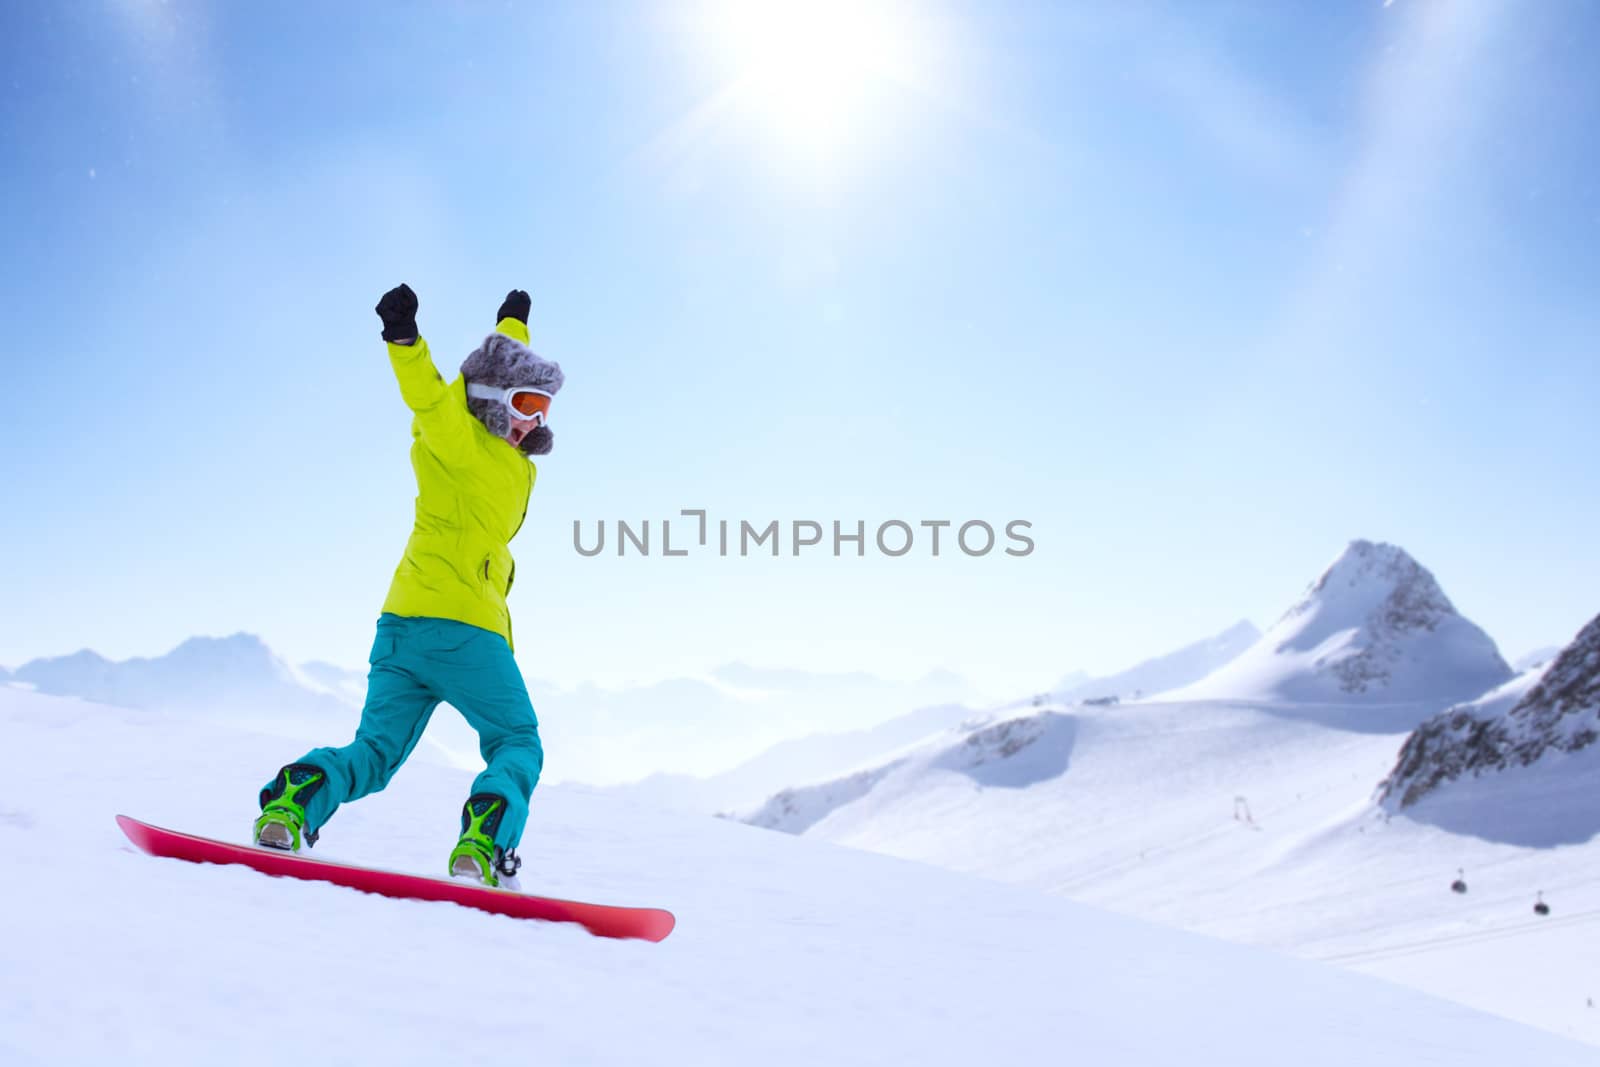 Girl snowboarder running down the slope in Alpine mountains. Winter sport and recreation, leisure outdoor activities. Image of excited screaming young woman enjoyment concept